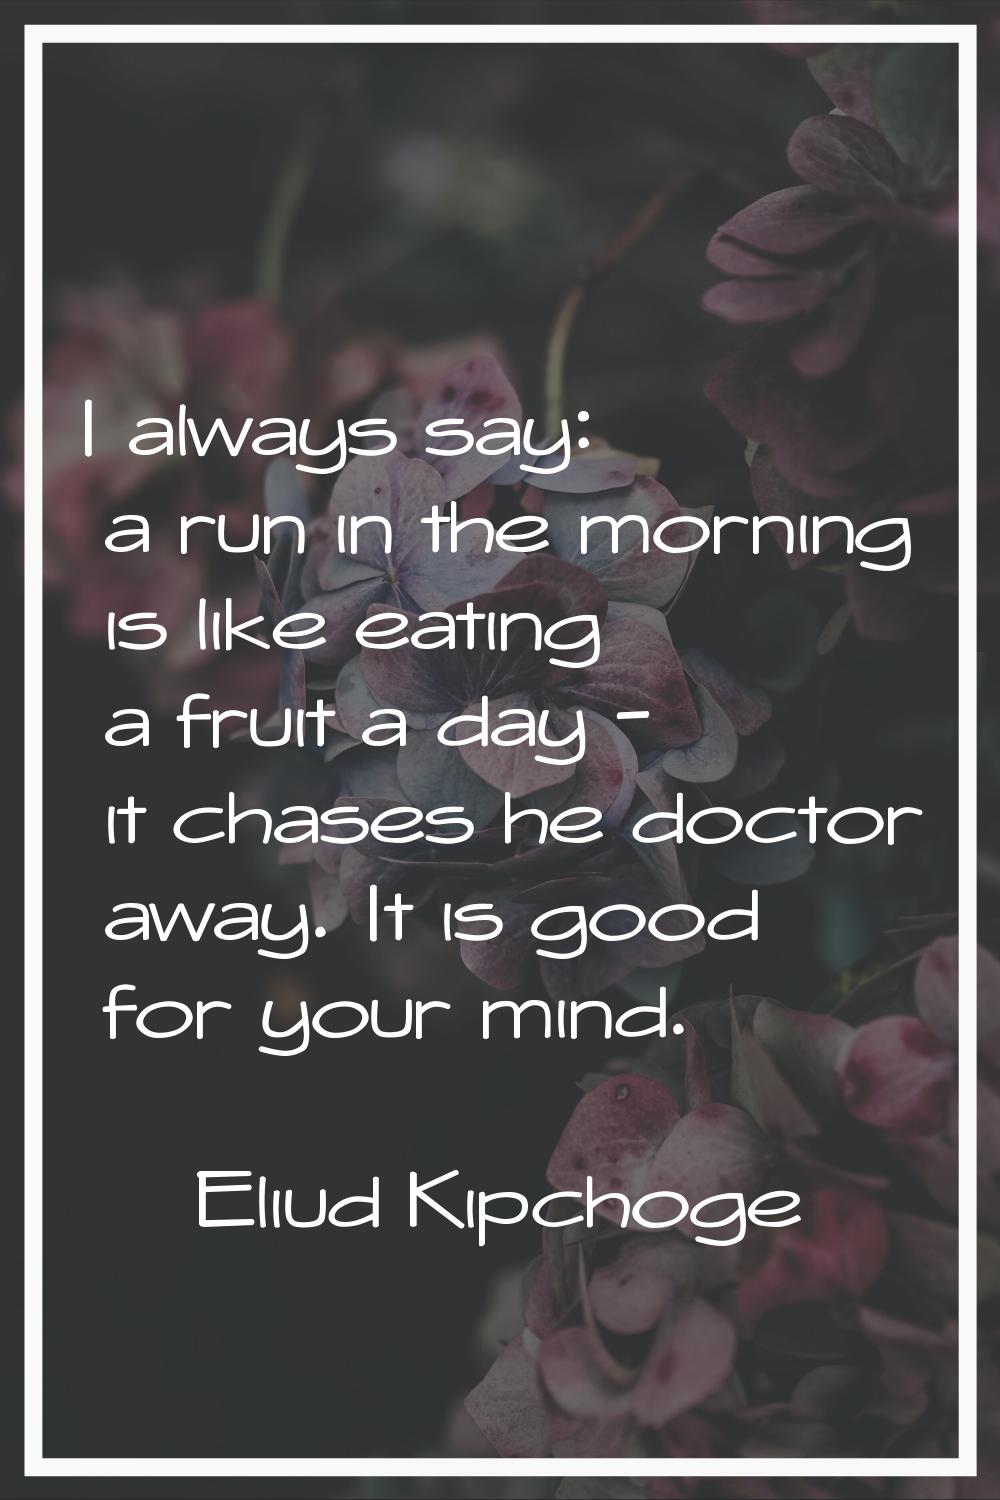 I always say: a run in the morning is like eating a fruit a day - it chases he doctor away. It is g